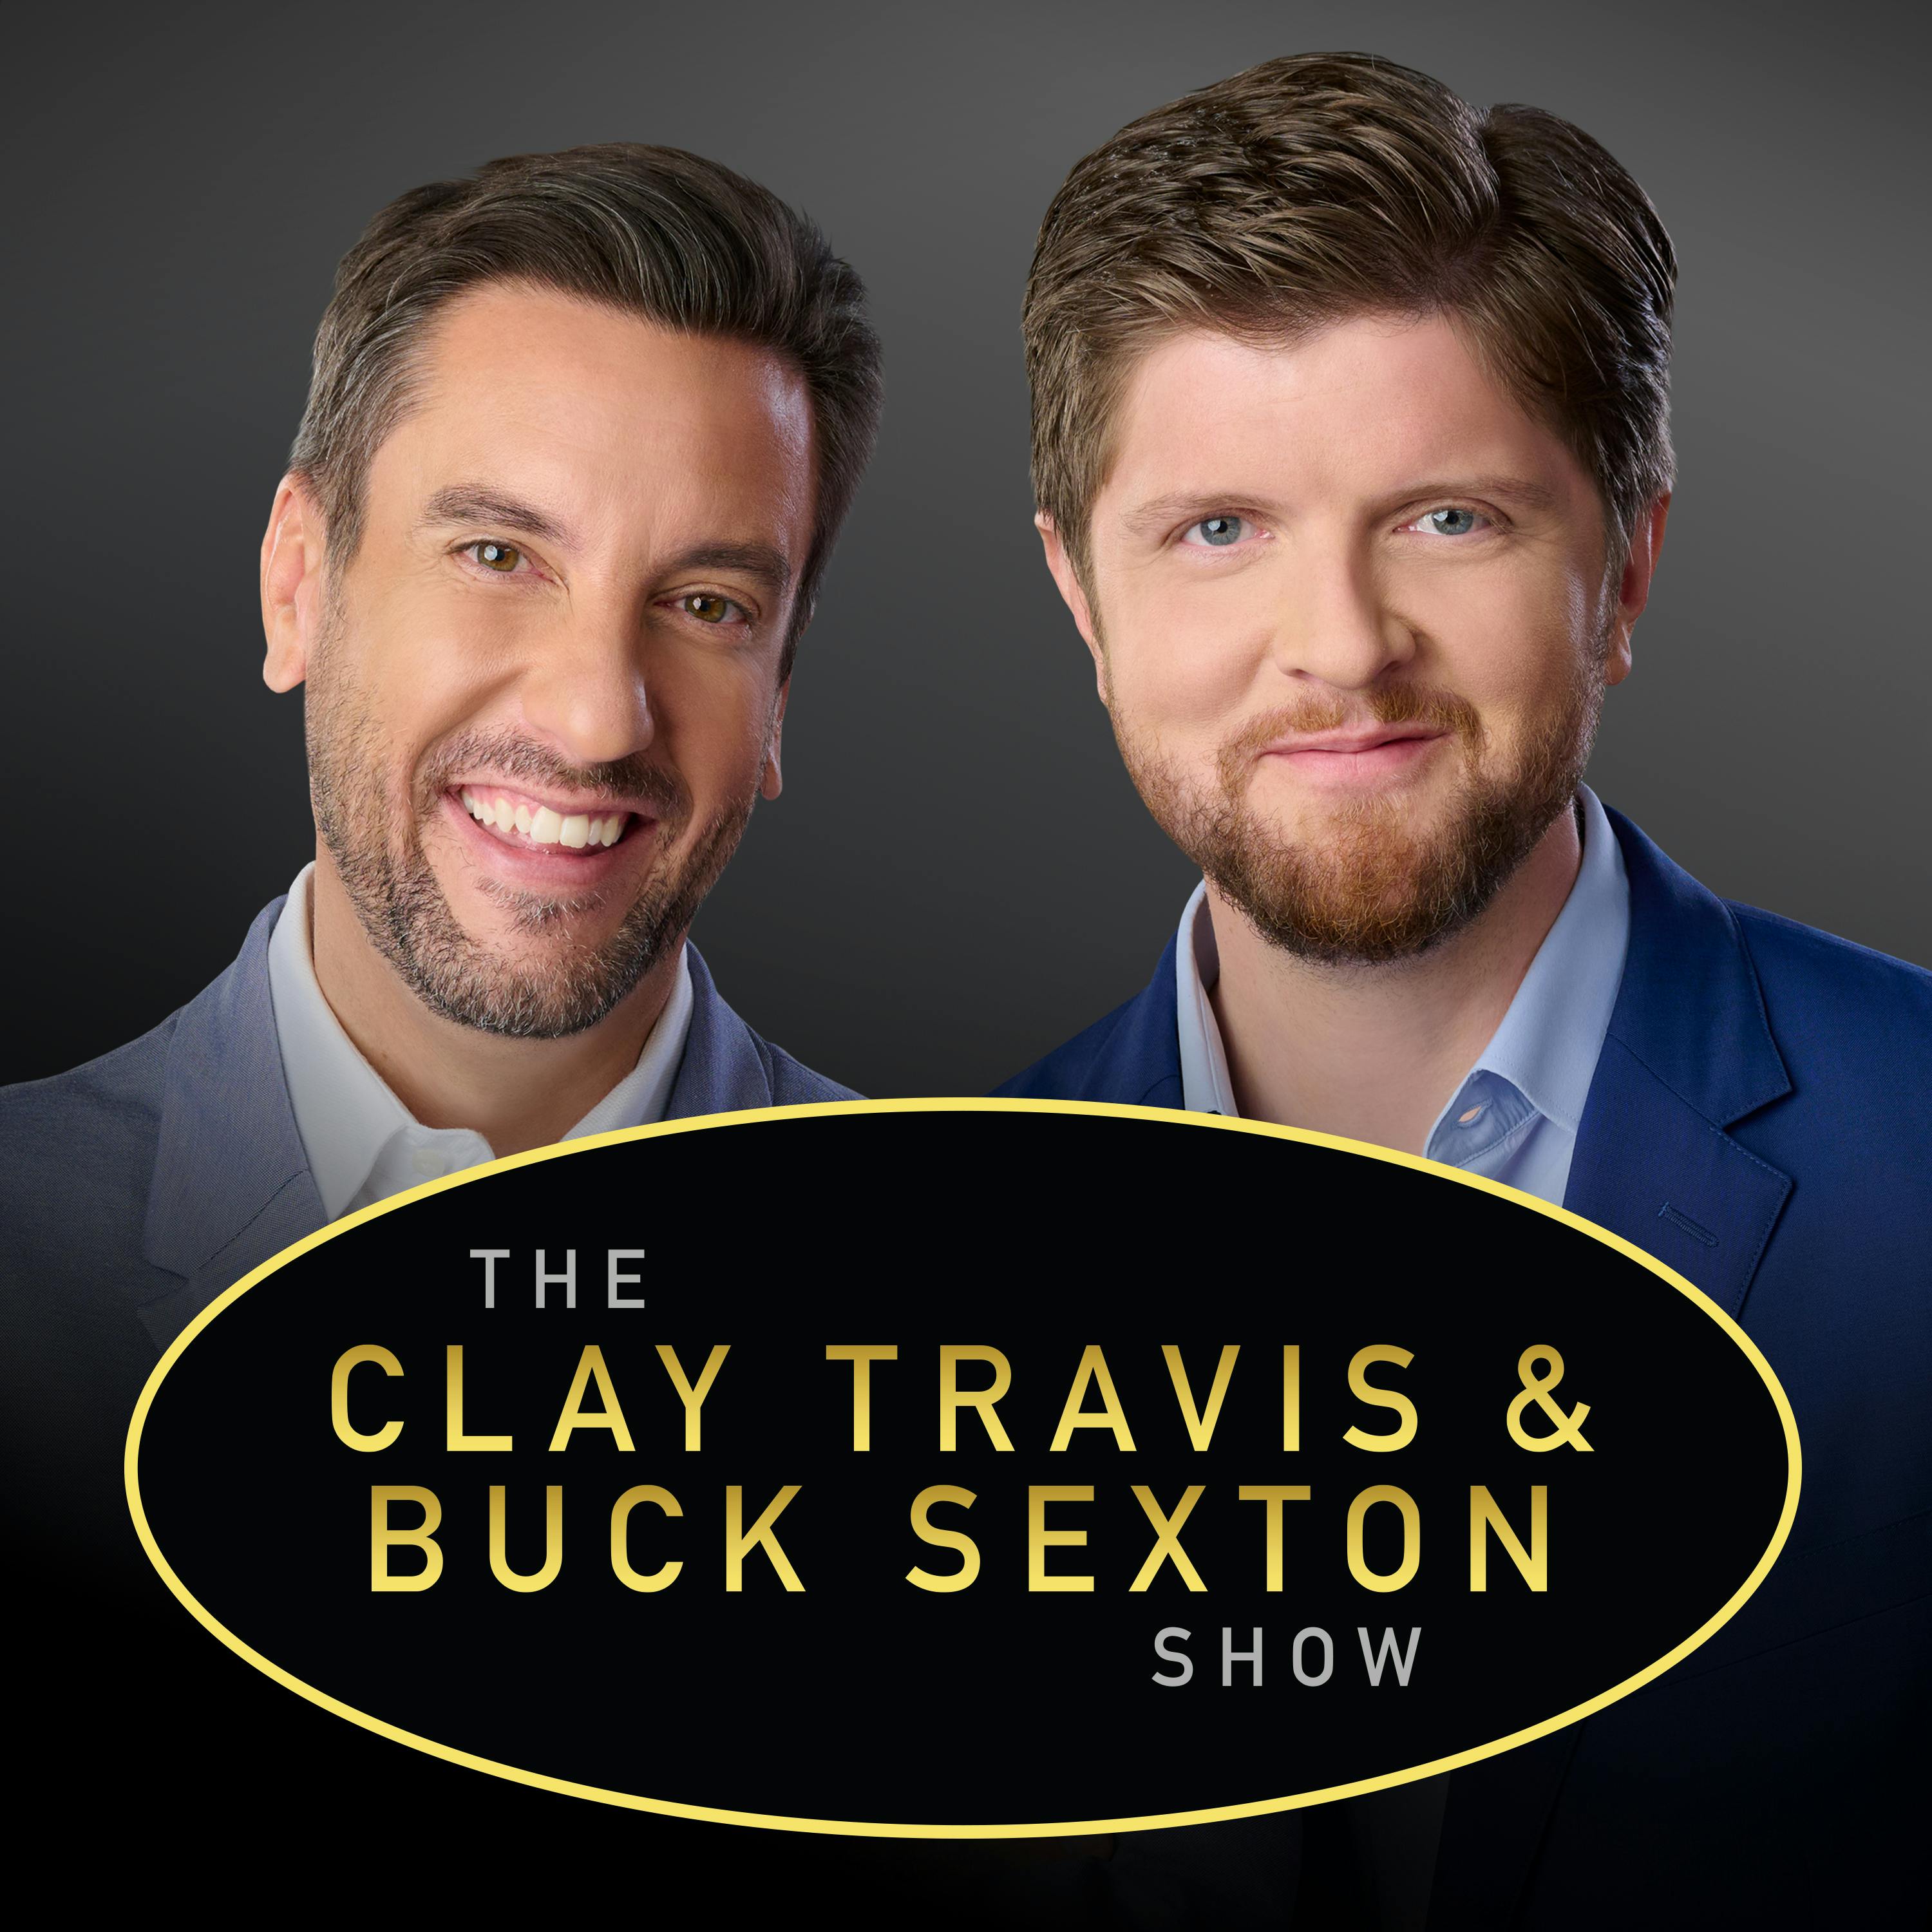 Clay Travis and Buck Sexton Show H1 – Jan 19 2022